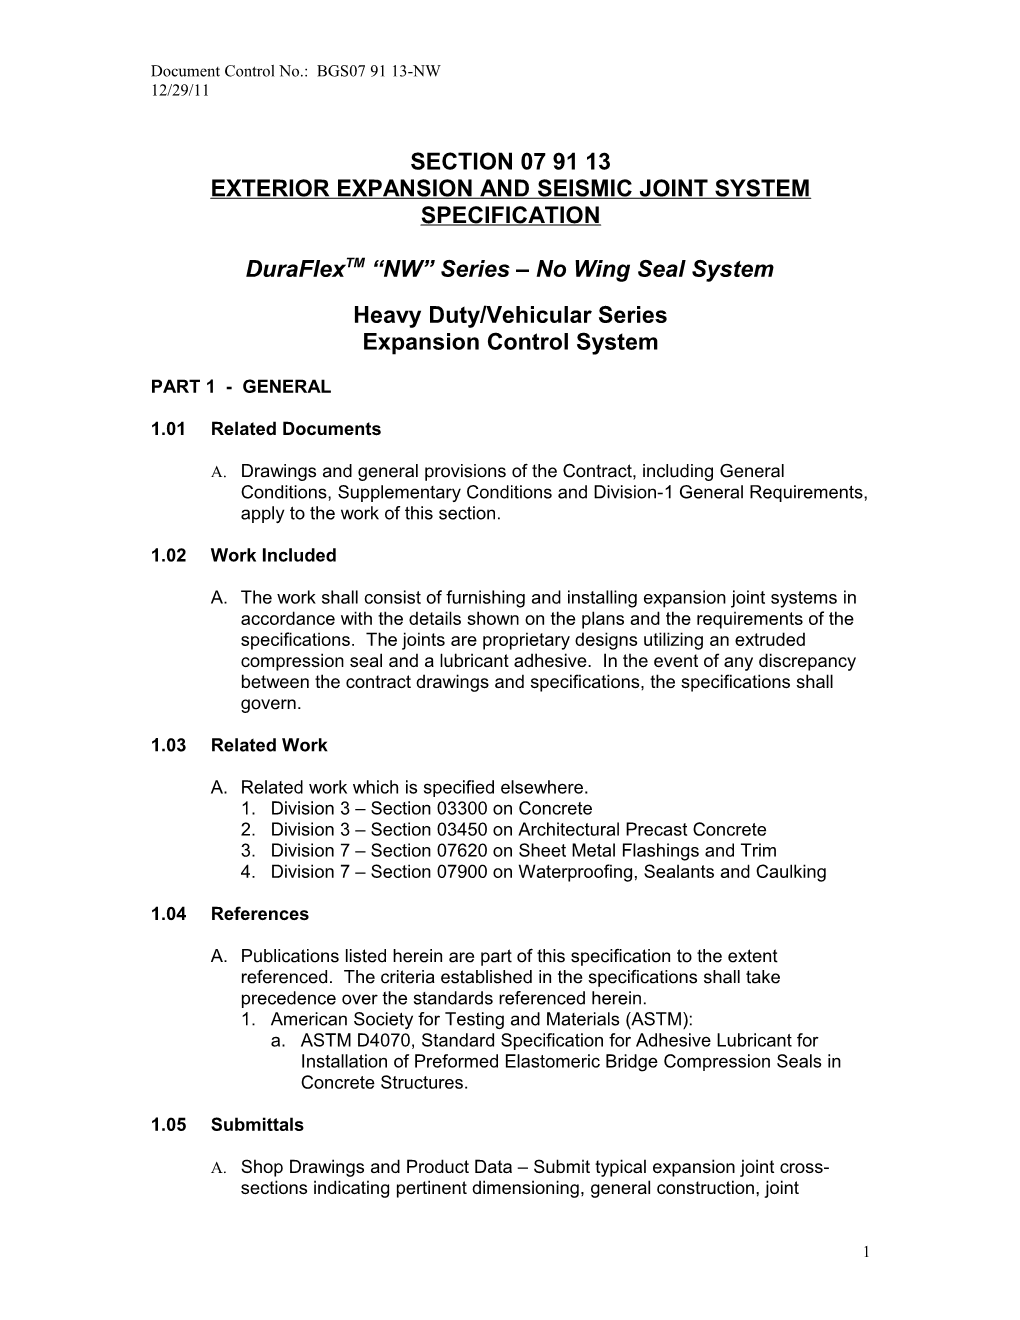 Exterior Expansion and Seismic Joint System Specification